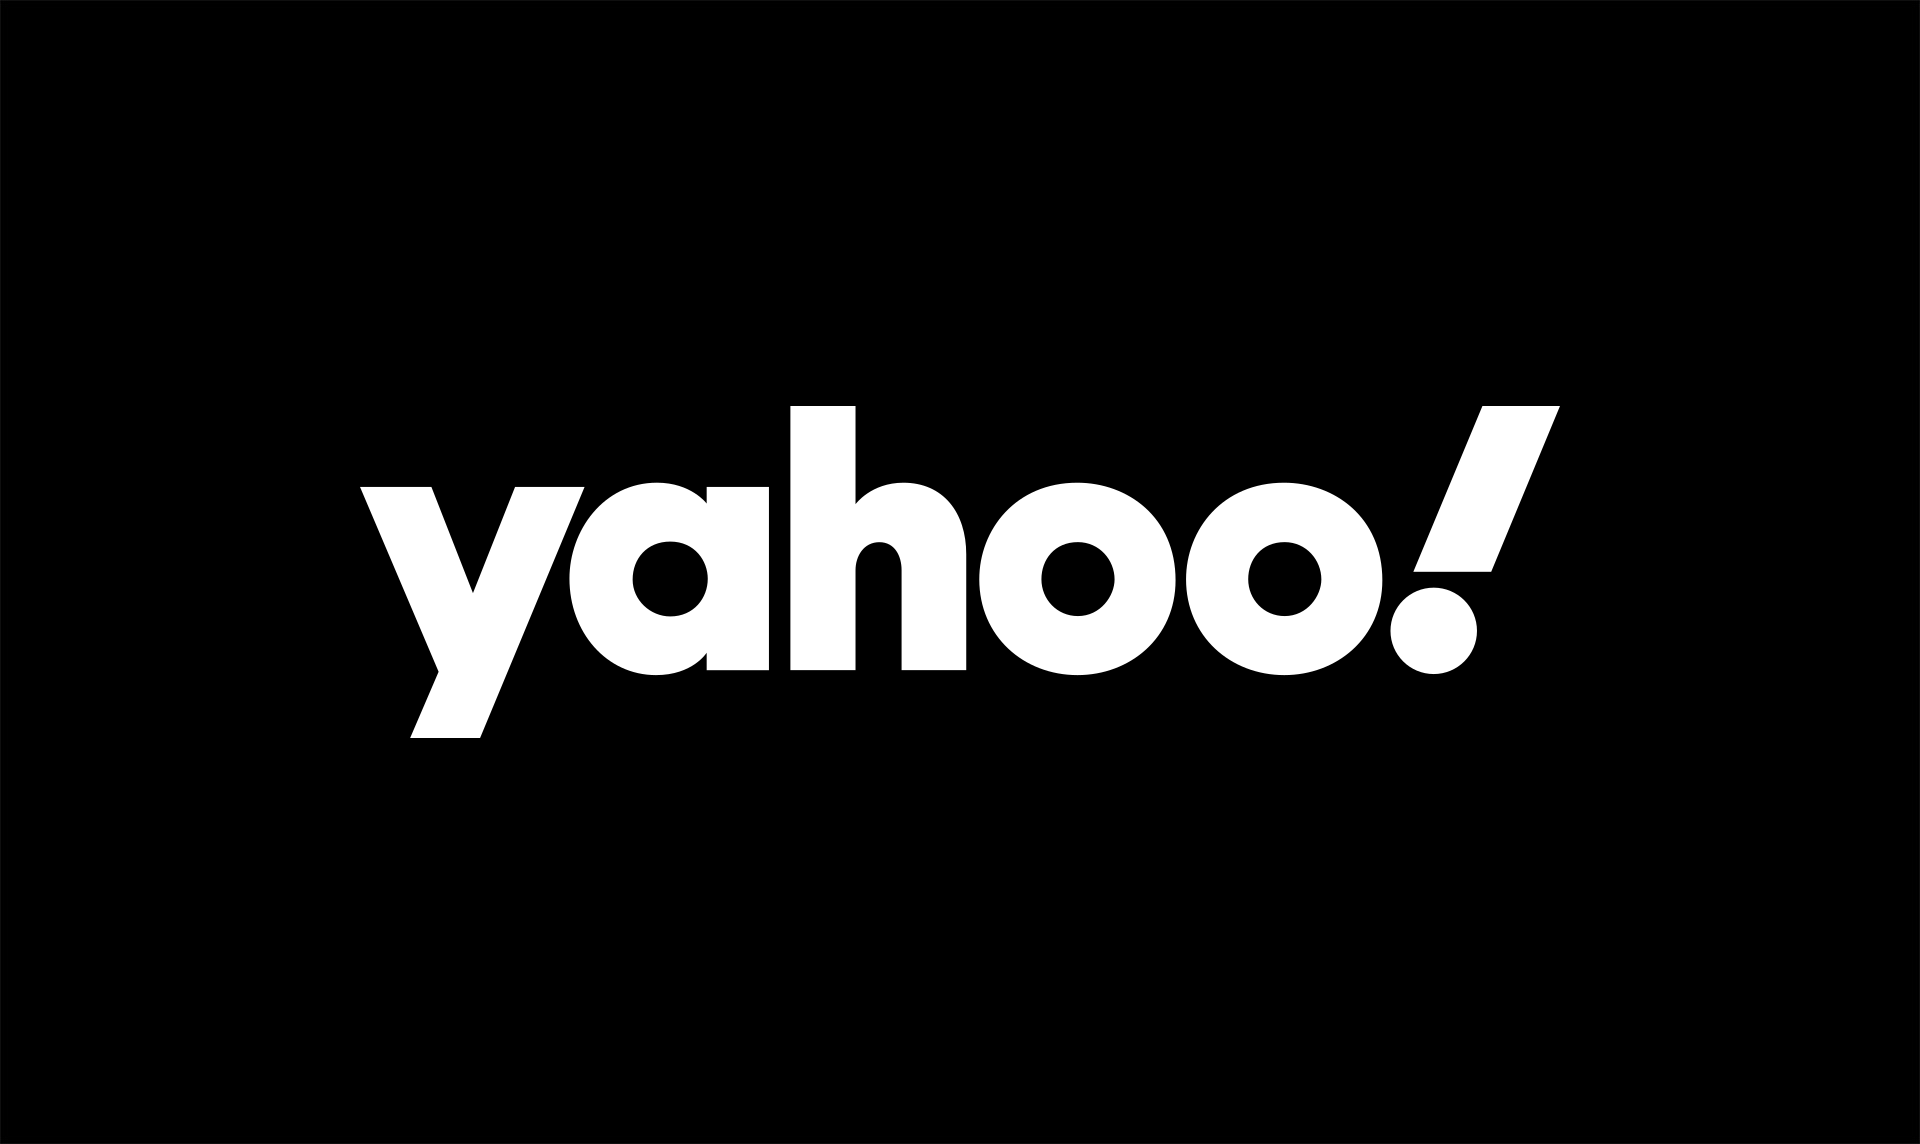 Yahoo! logo in white text on a black background, featuring an exclamation mark at the end.